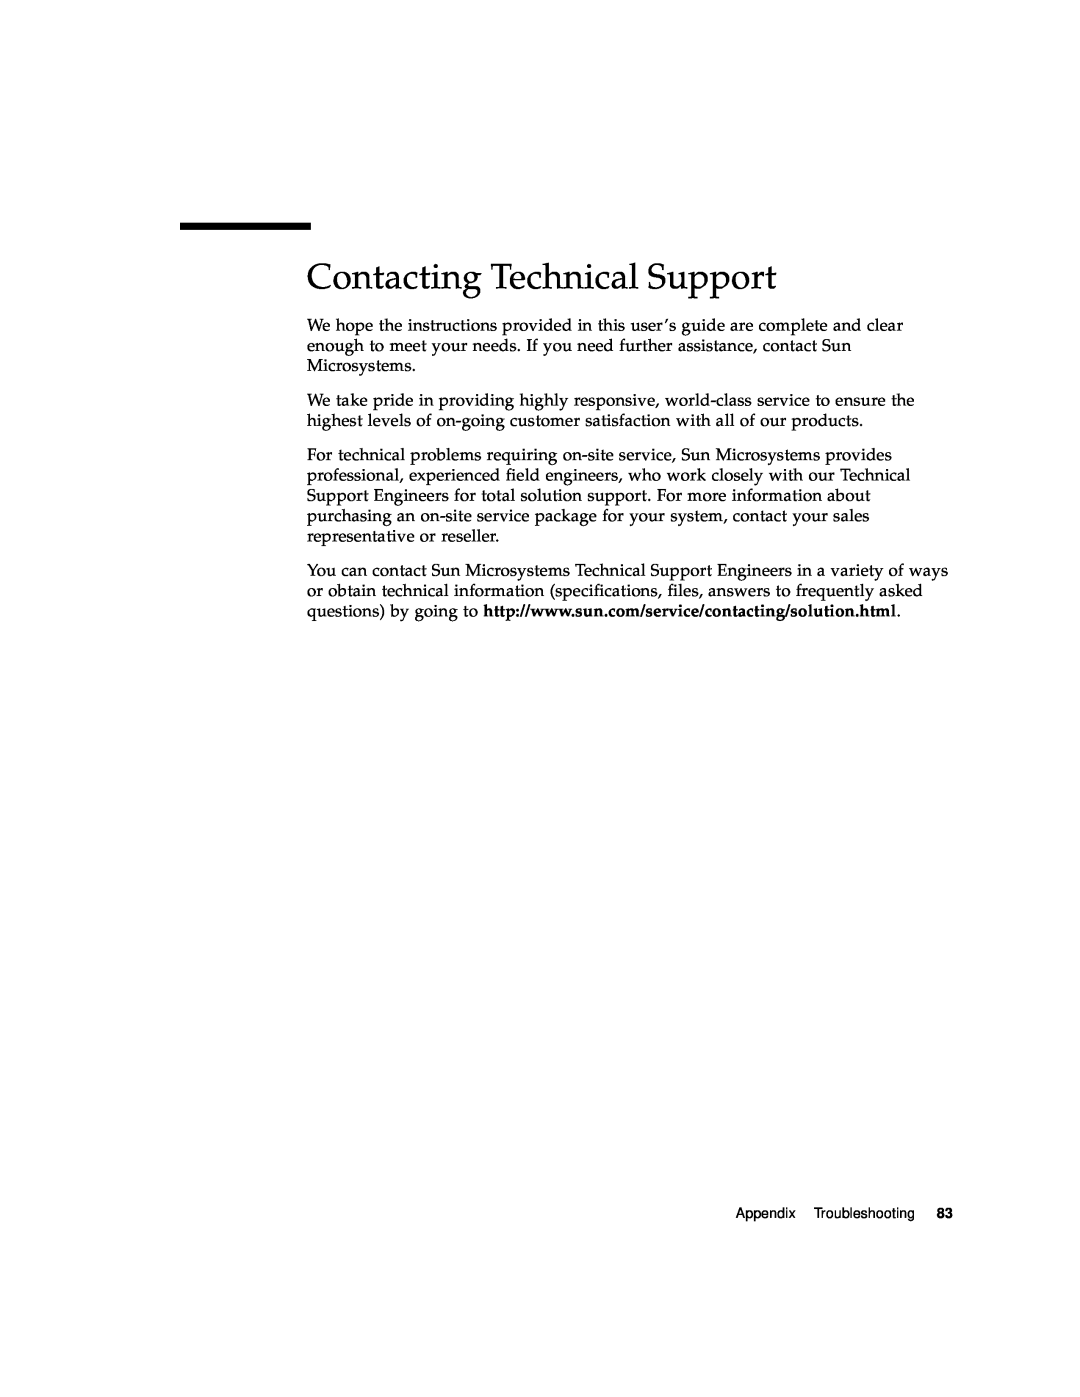 Sun Microsystems 5210 NAS manual Contacting Technical Support, Appendix Troubleshooting 